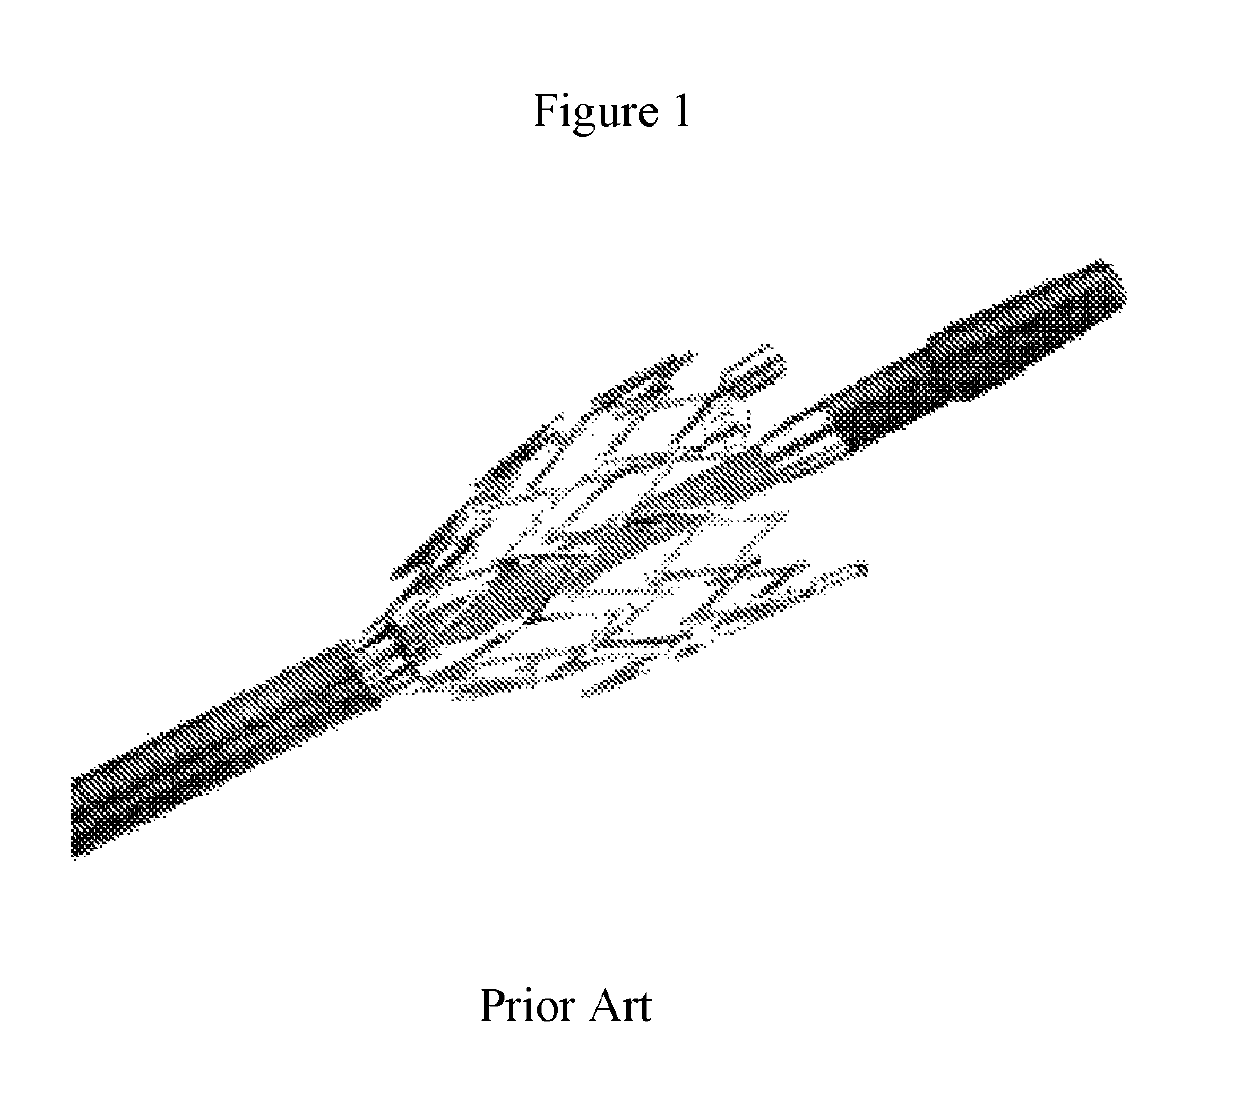 Highly retractable intravascular stent conveying system